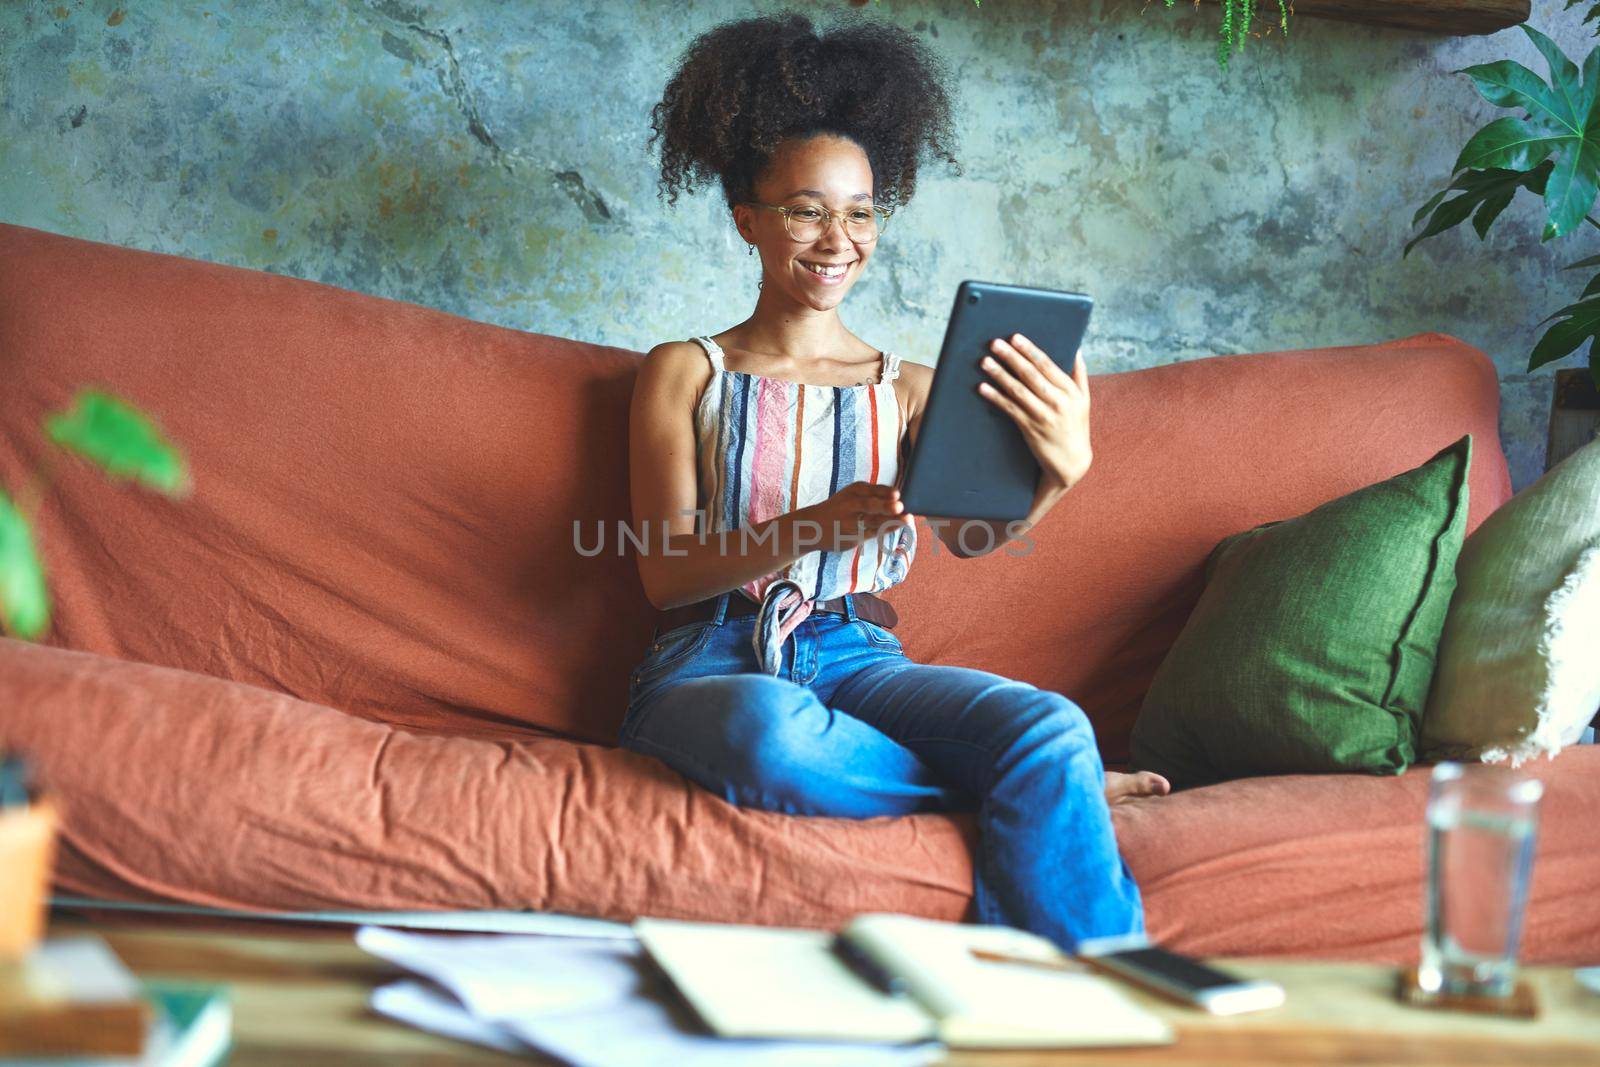 Work meetings from home today - Stock photo by VizDelux